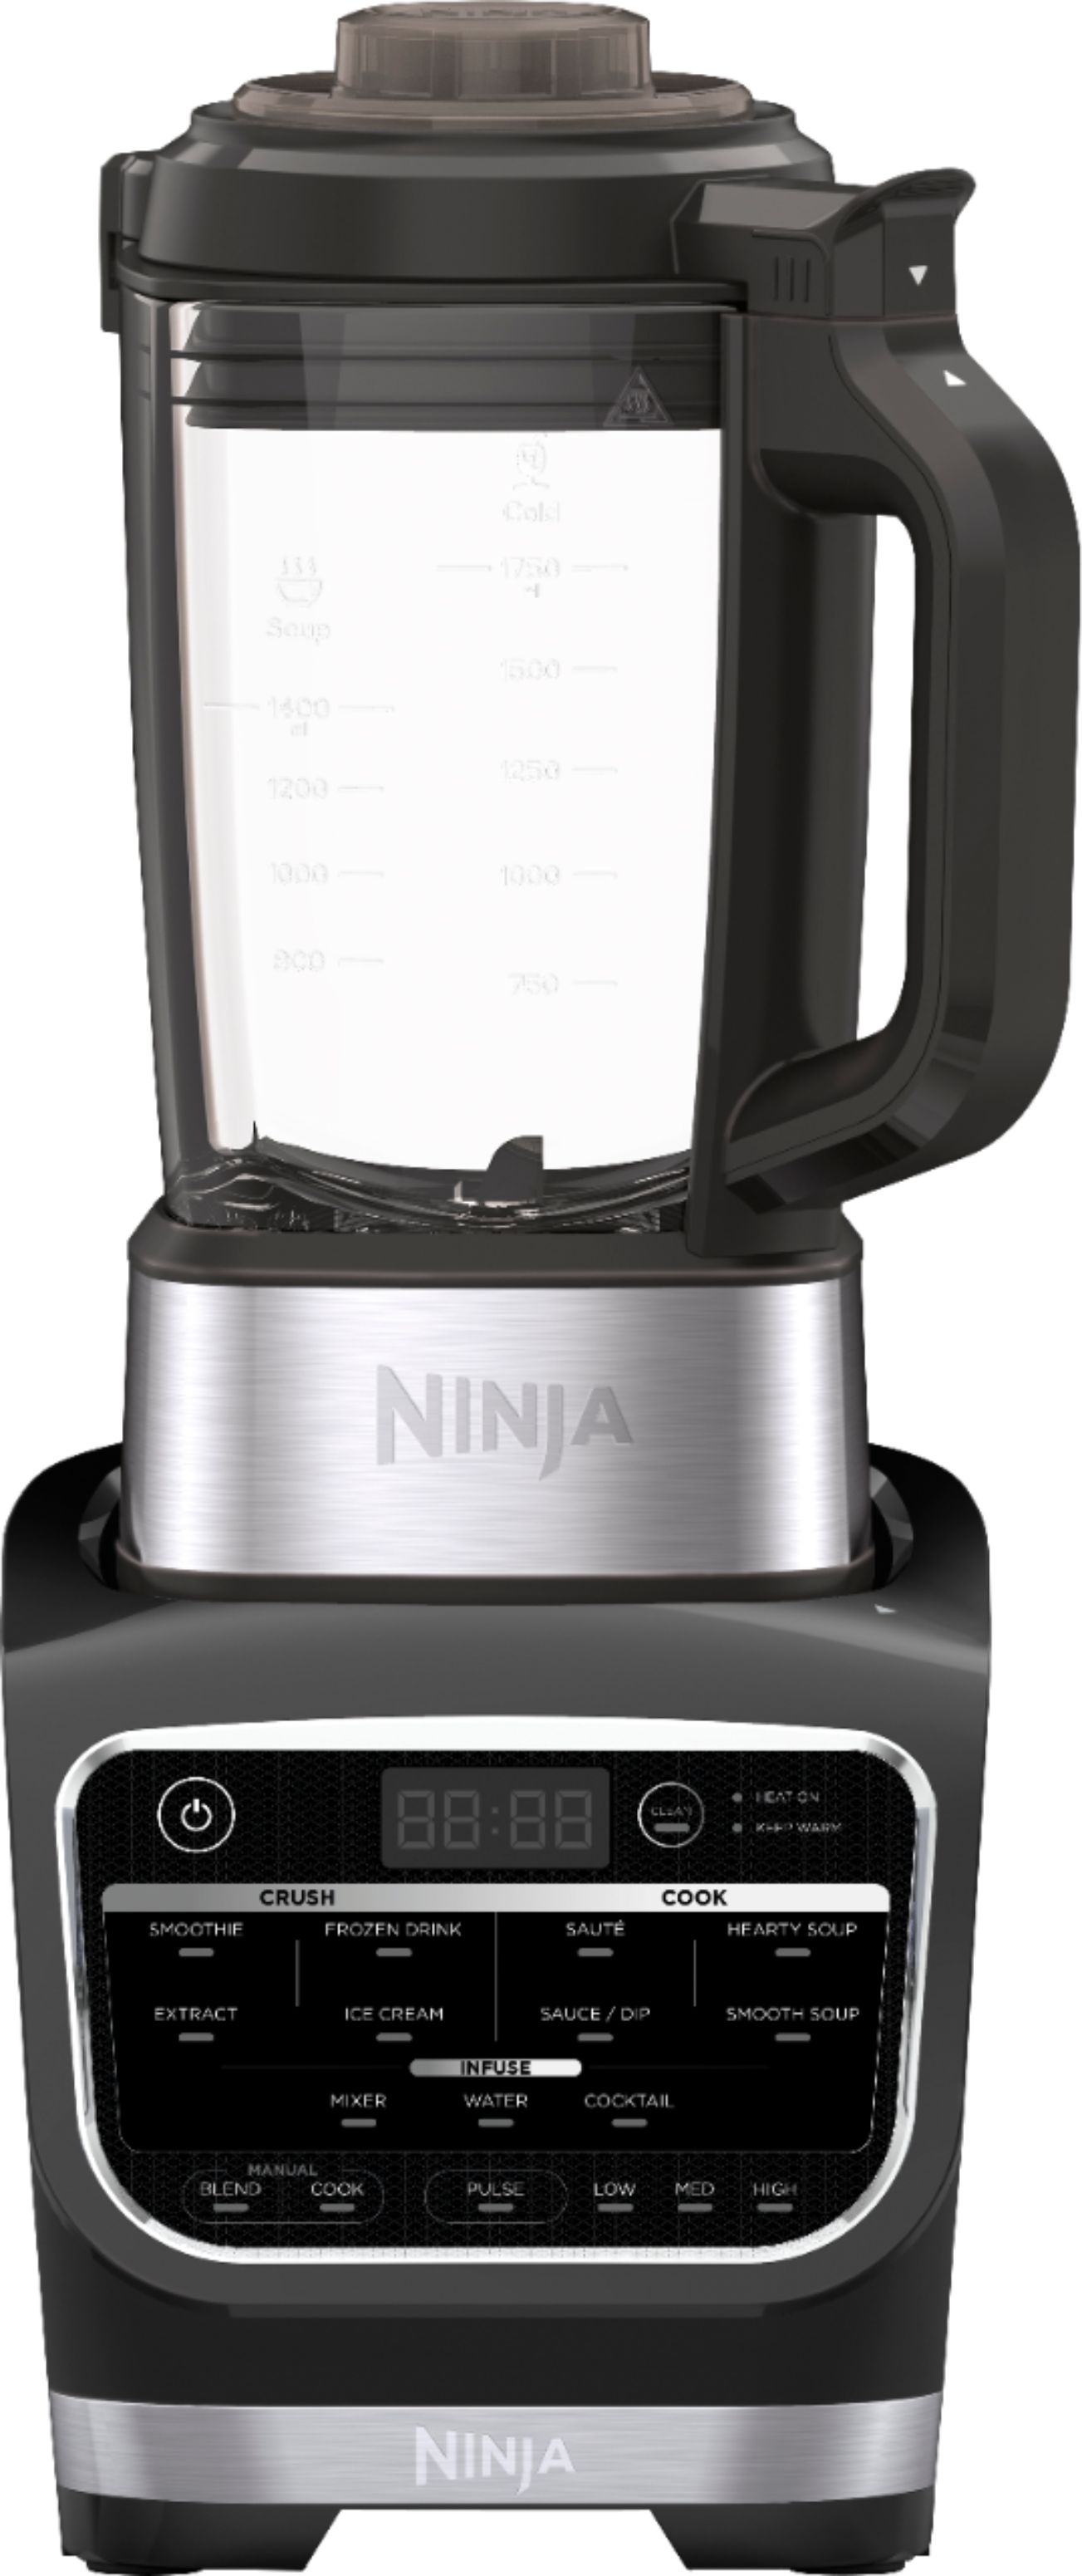 Angle View: Instant - Ace Nova Multi-Use Cooking & Beverage Blender - Silver